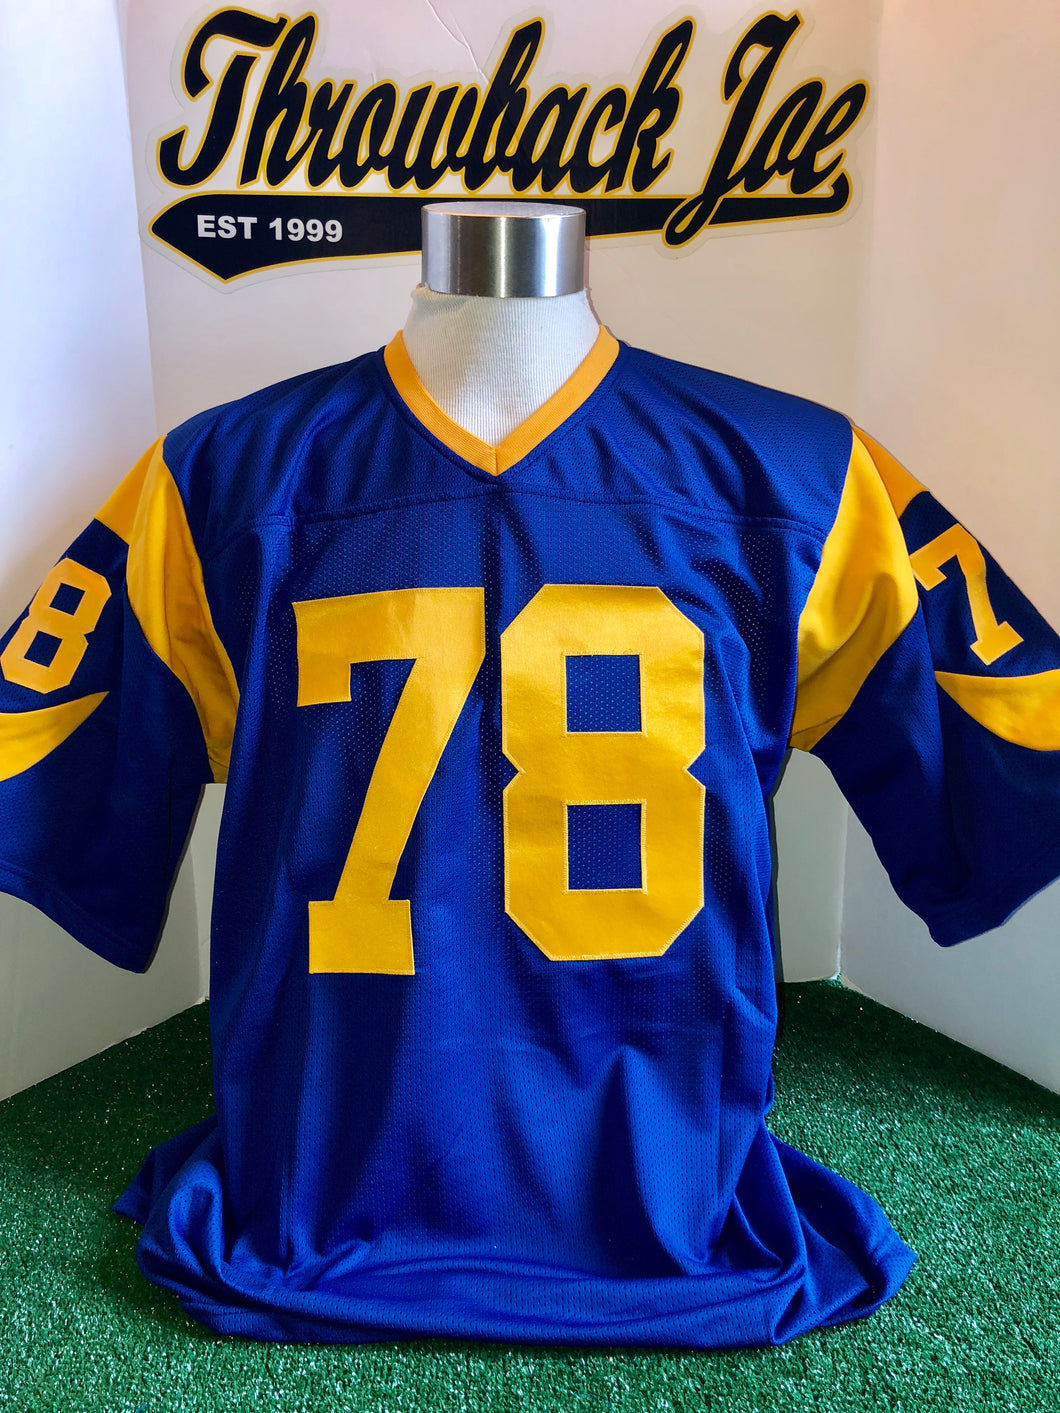 1973-1999 STYLE HOME JERSEY